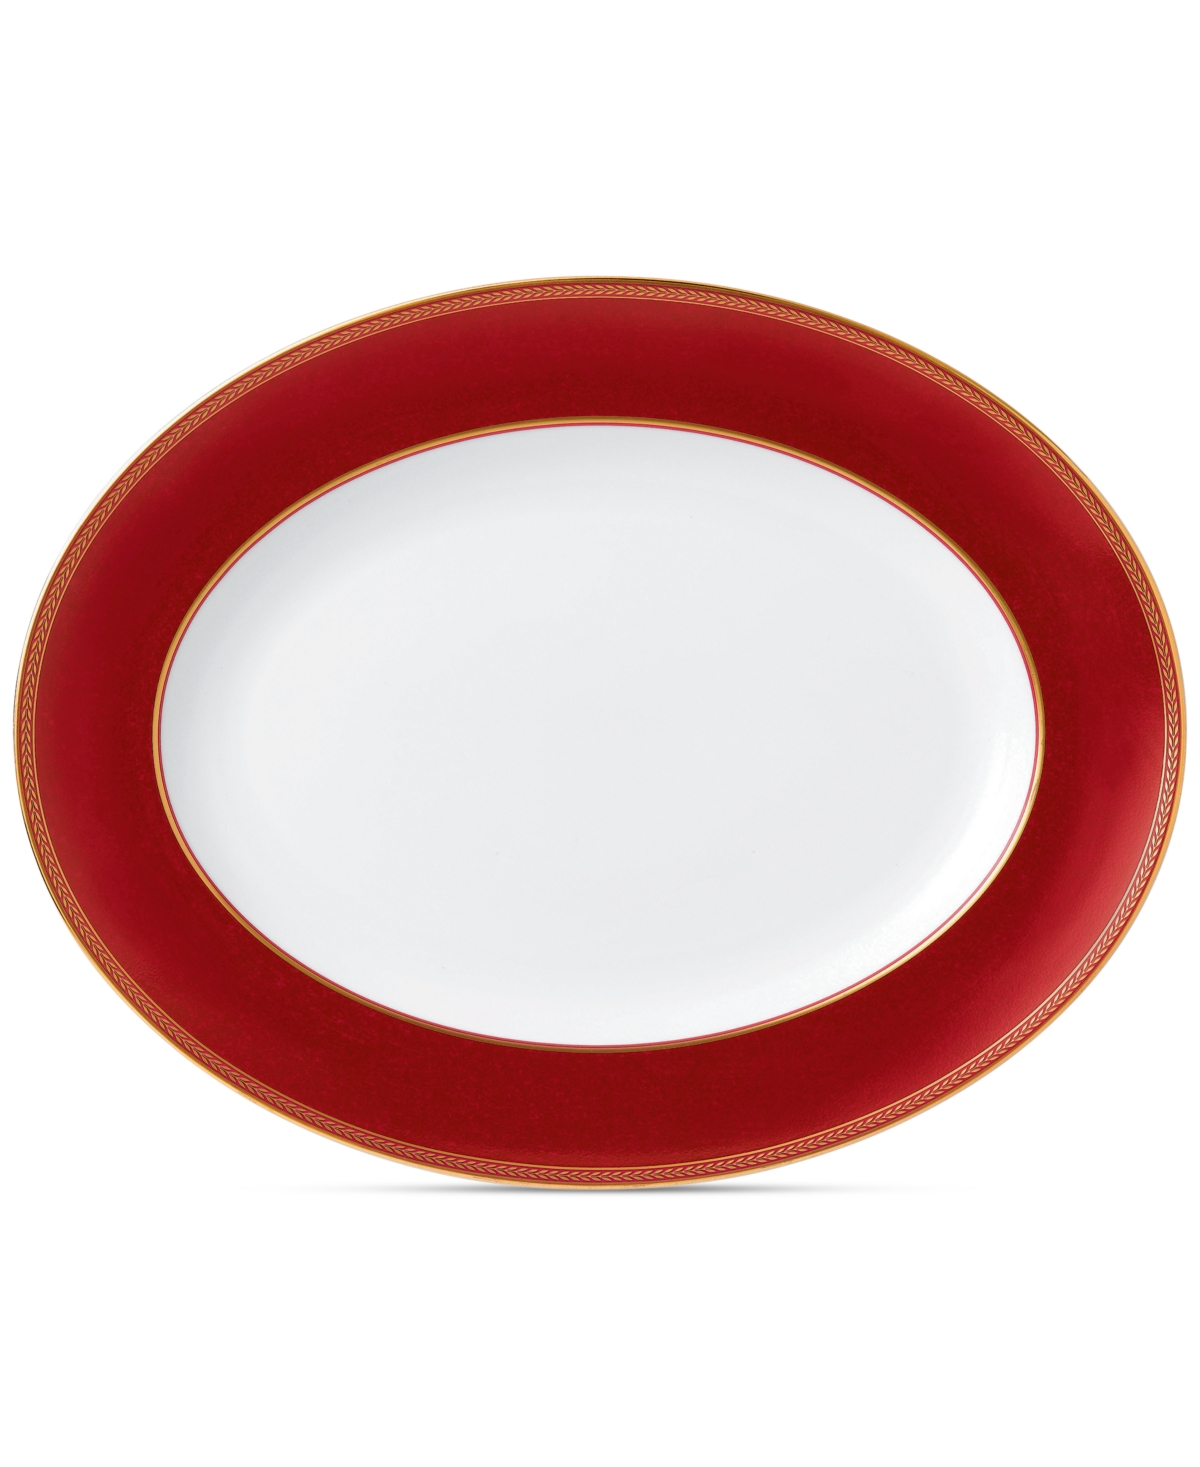 Wedgwood Renaissance Red Oval Platter In No Color